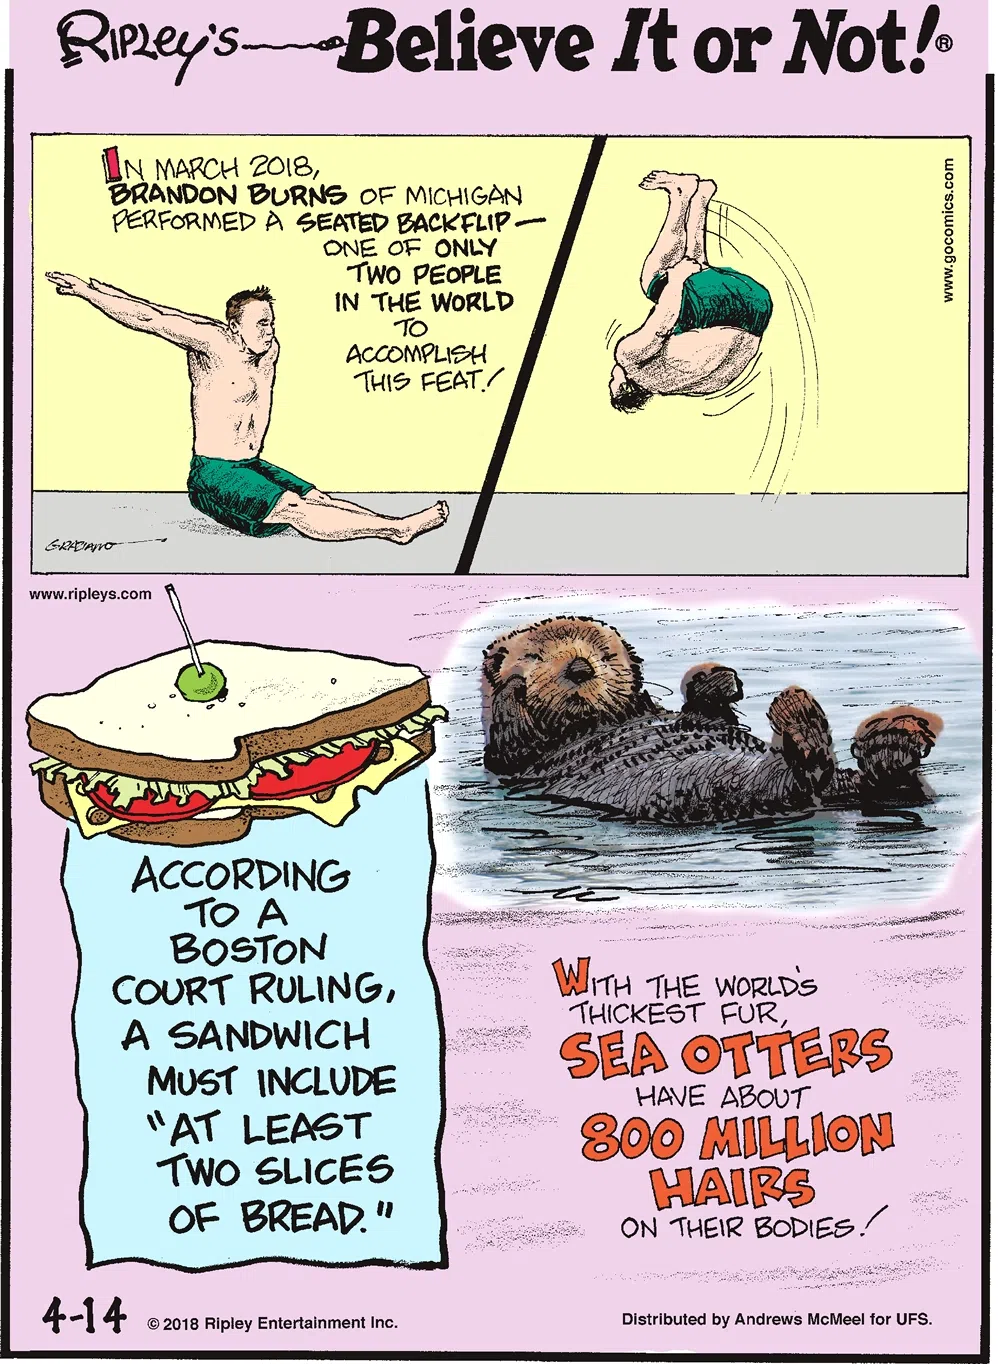 In March 2018, Brandon Burns of Michigan performed a seated backflip - one of only two people in the world to accomplish this feat!-------------------- According to a Boston court ruling, a sandwich must include "at least two slices of bread."-------------------- With the world's thickest fur, sea otters have about 800 million hairs on their bodies!